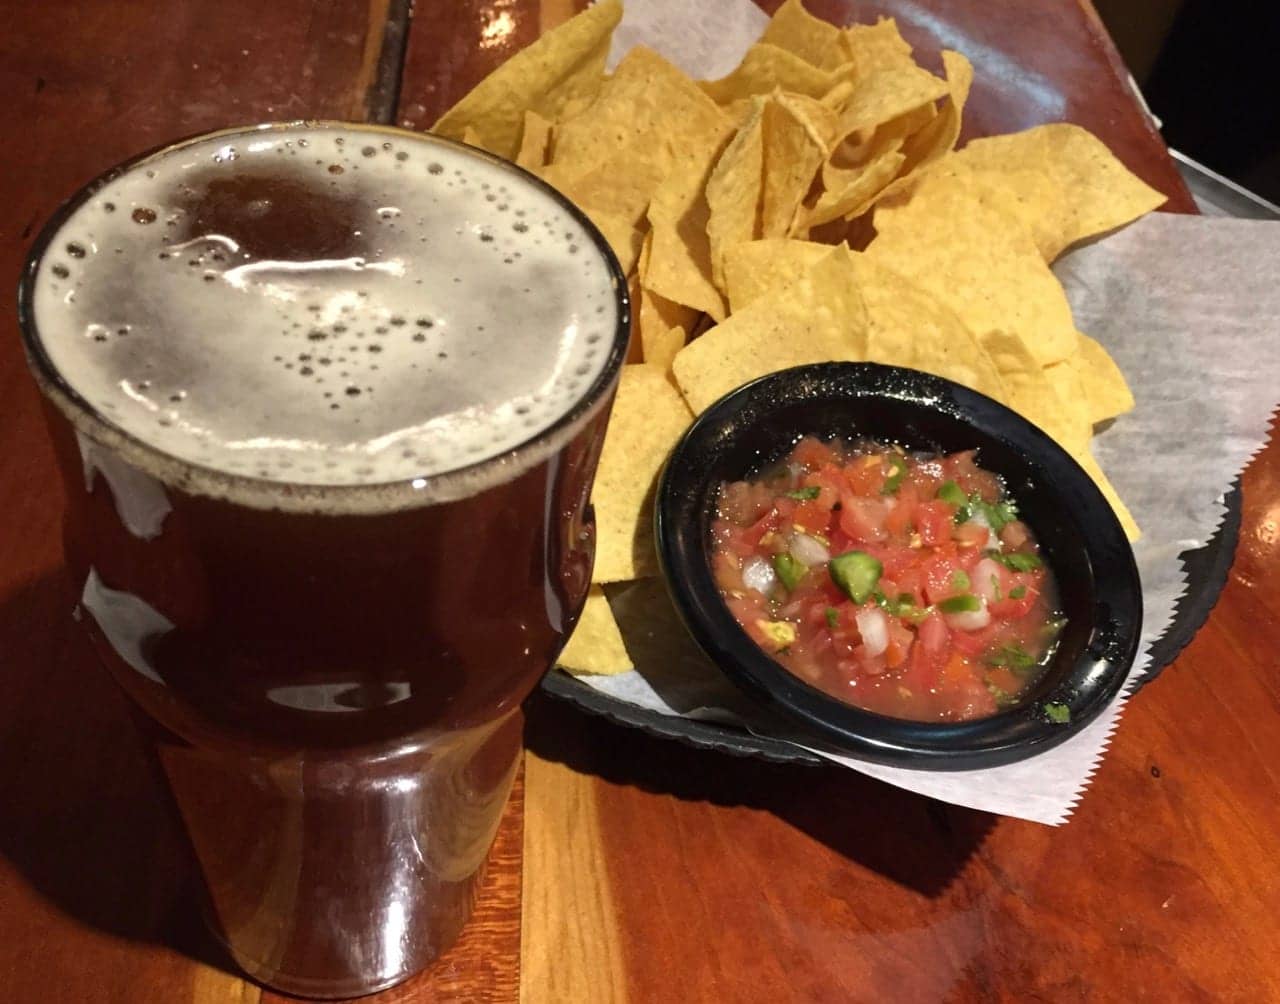 Chips and salsa at Bad shepherd Beer Co.